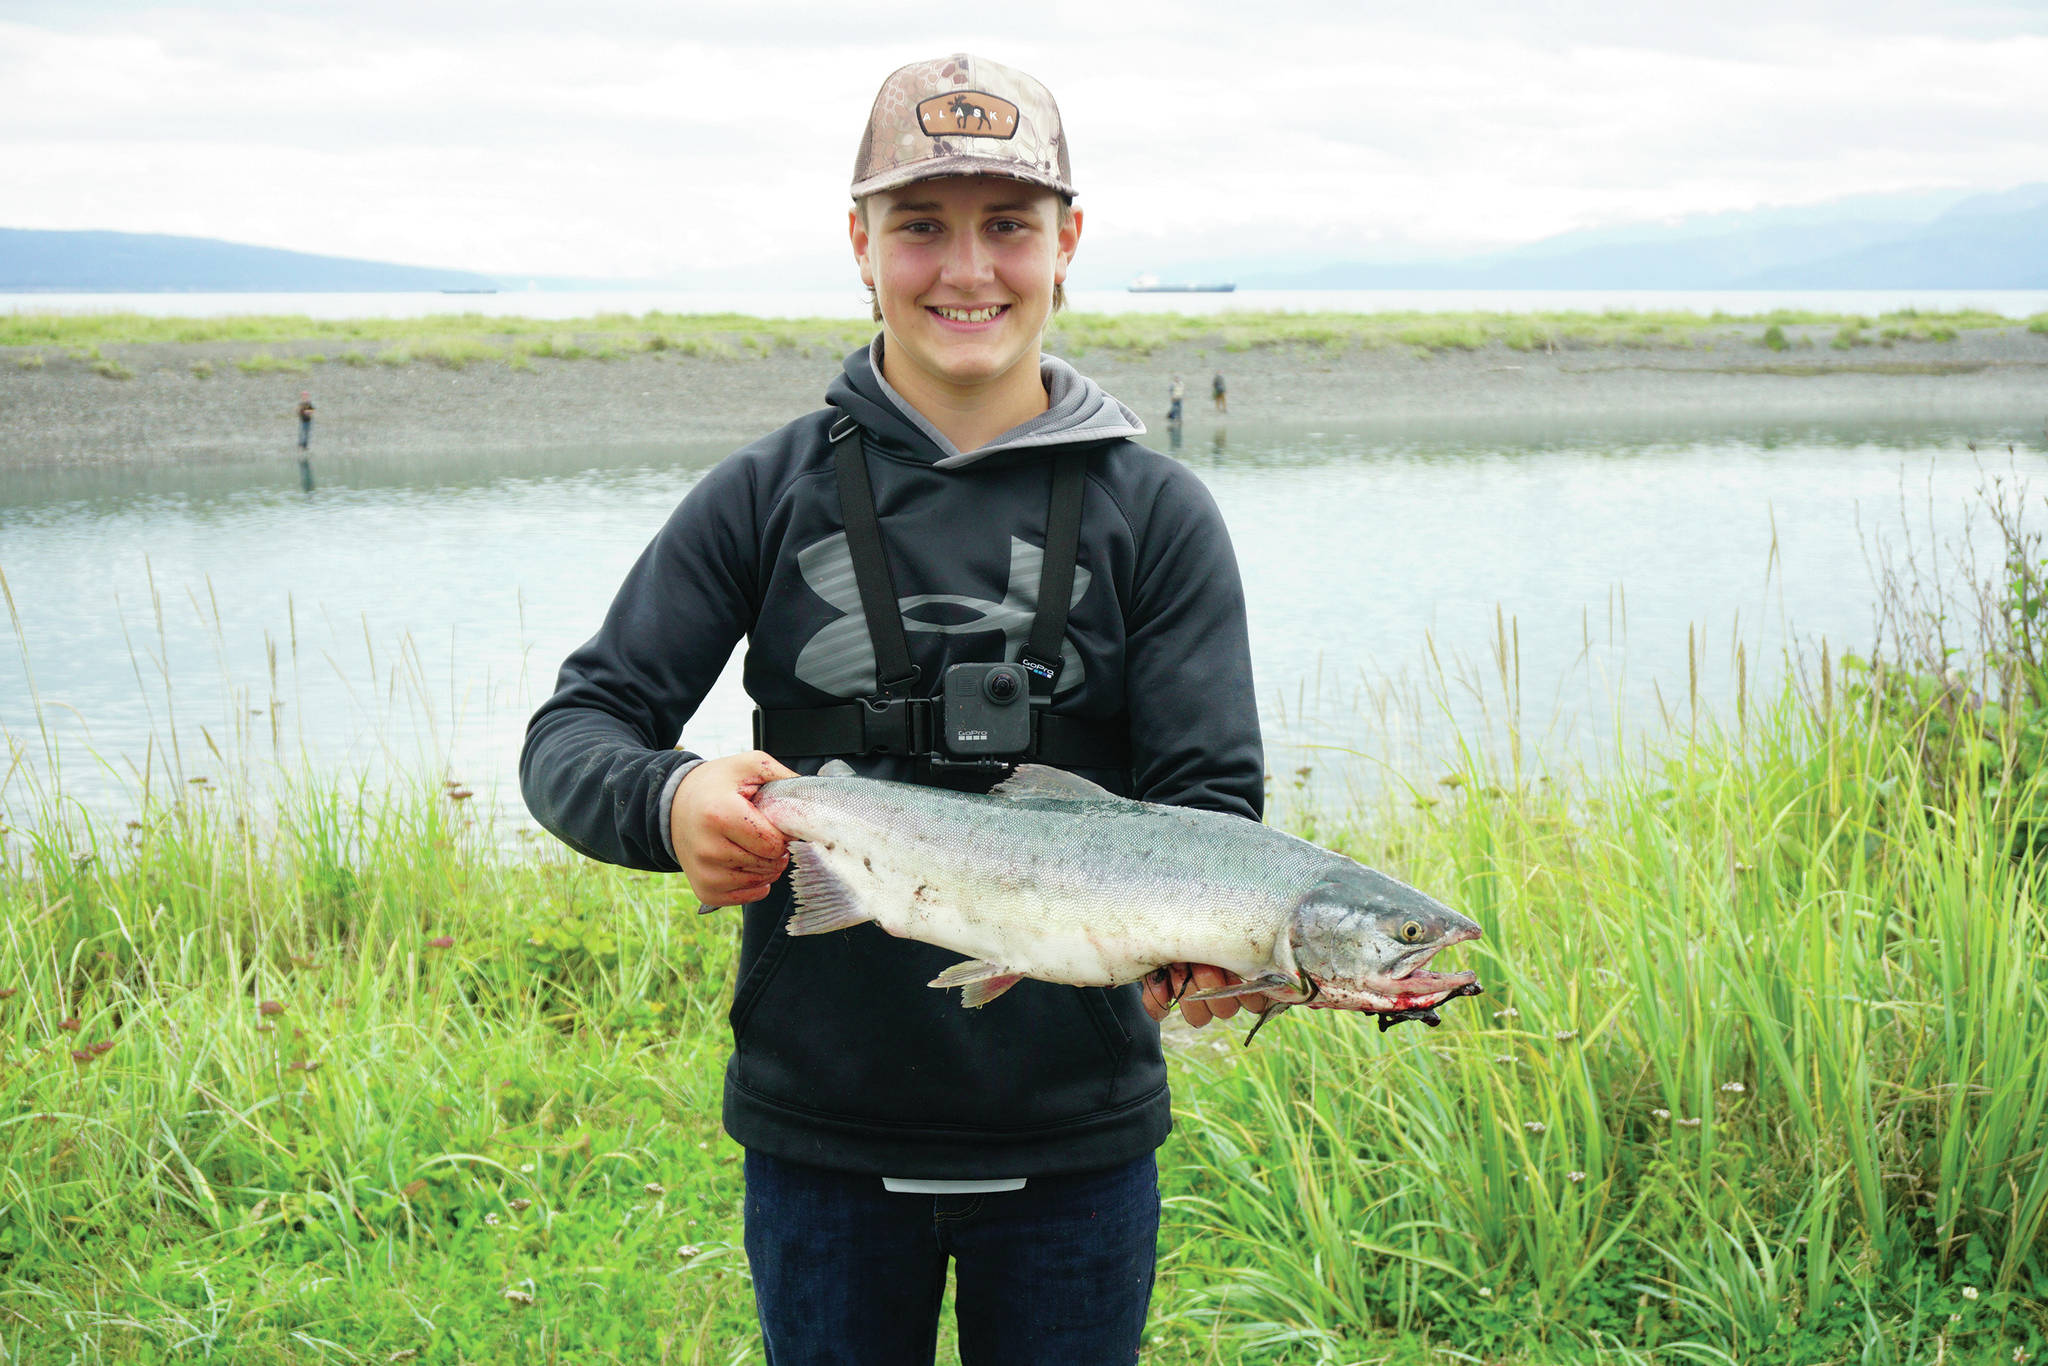 Reece Tousignant, 15, of Green Bay, Wisconsin, poses with a pink salmon he caught on Monday, Aug. 3, 2020, at the Nick Dudiak Fishing Lagoon in Homer, Alsaka. (Photo by Michael Armstrong/Homer News)